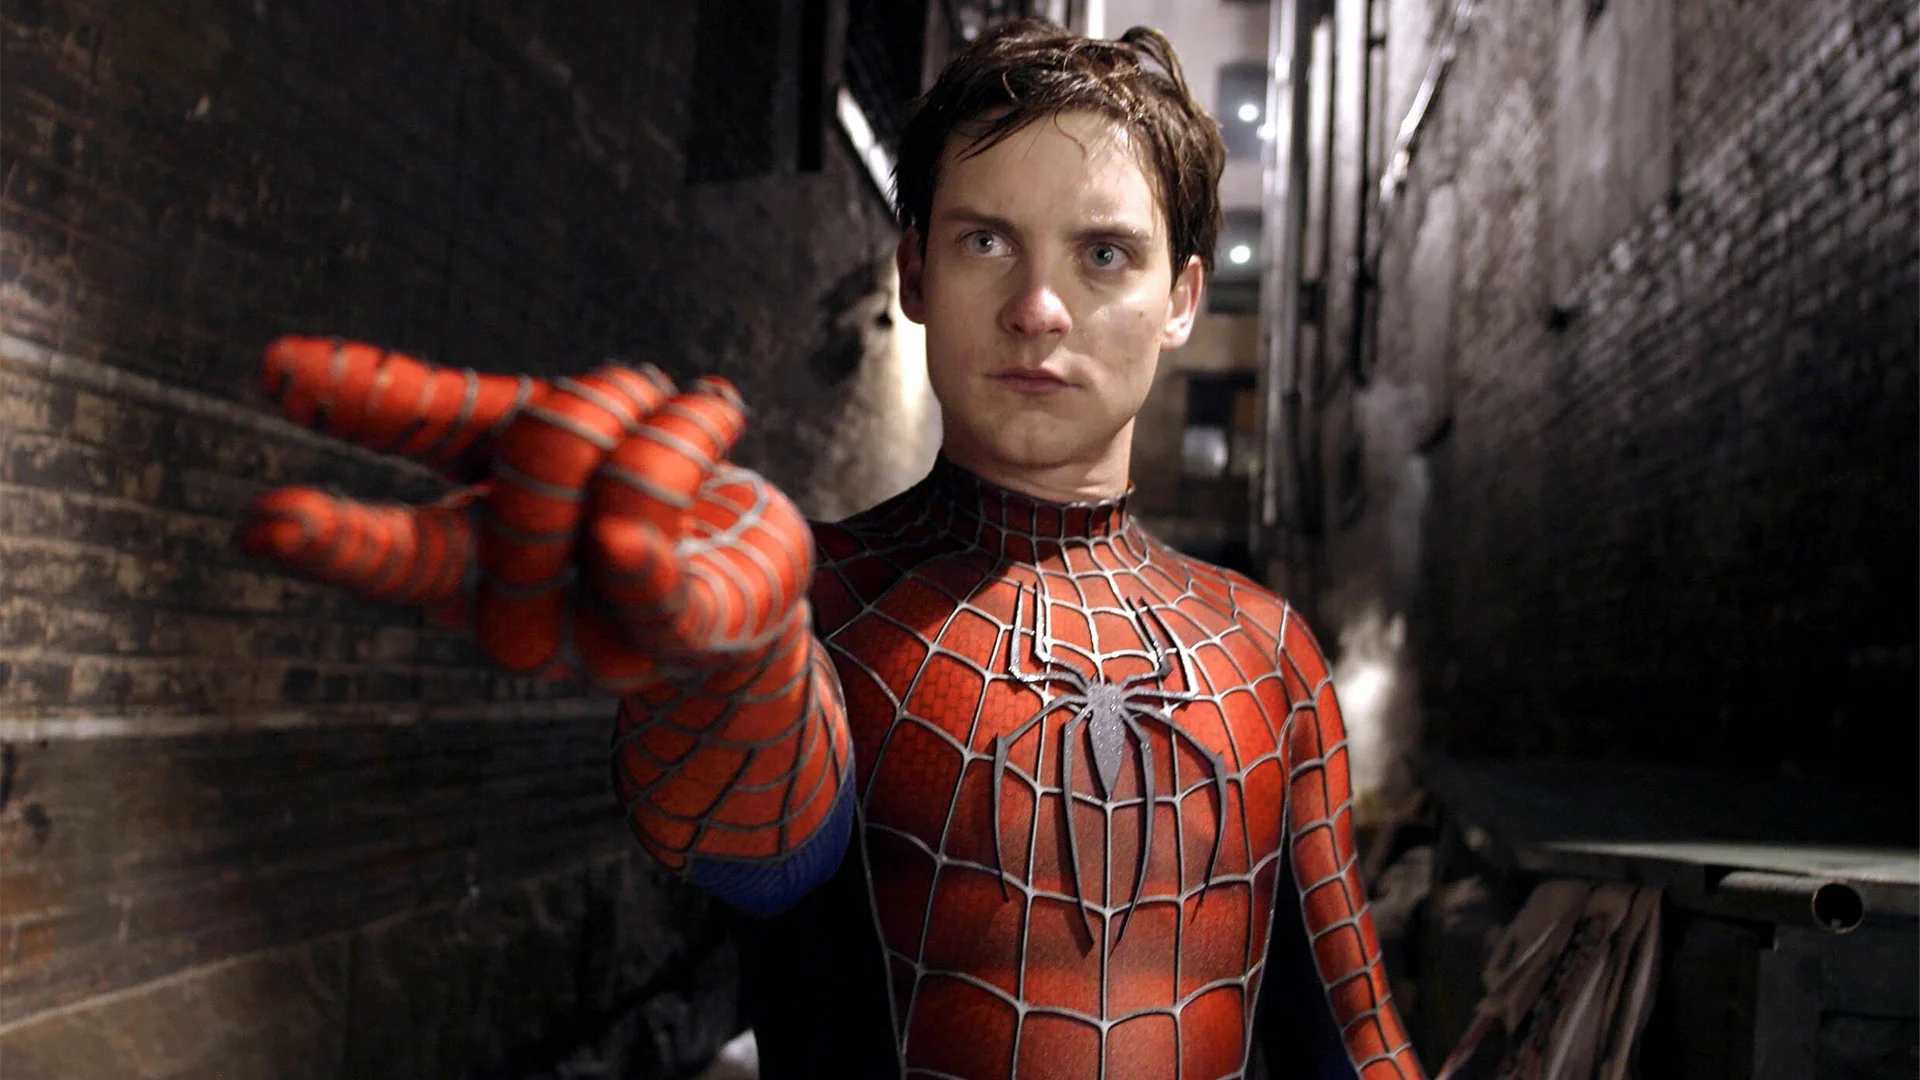 Marvel's Spider-Man Remastered received a mod that adds Tobey Maguire to the game